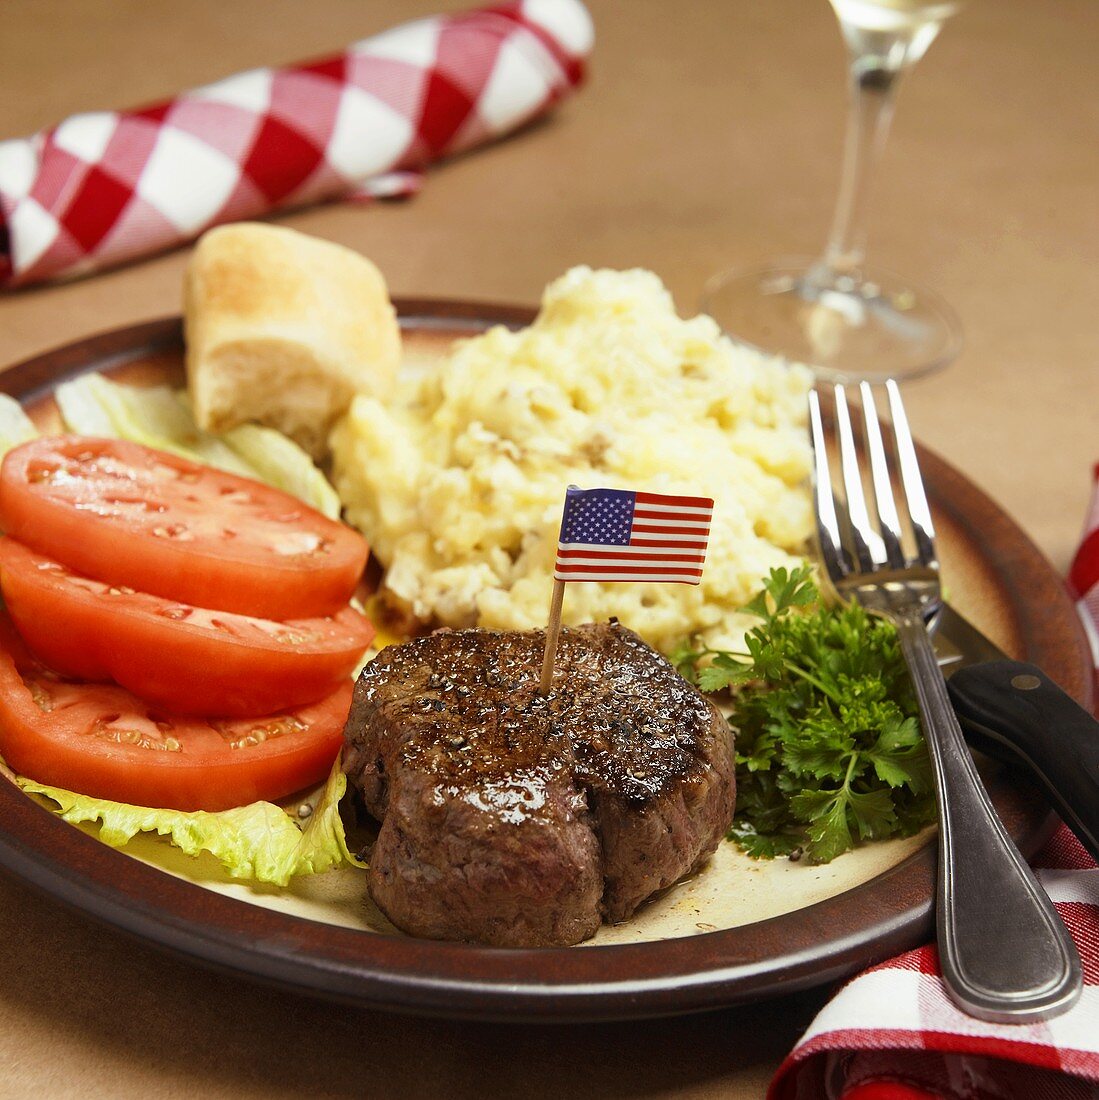 A Steak Fillet with an American Flag Toothpick, Mashed Potatoes and Tomatoes